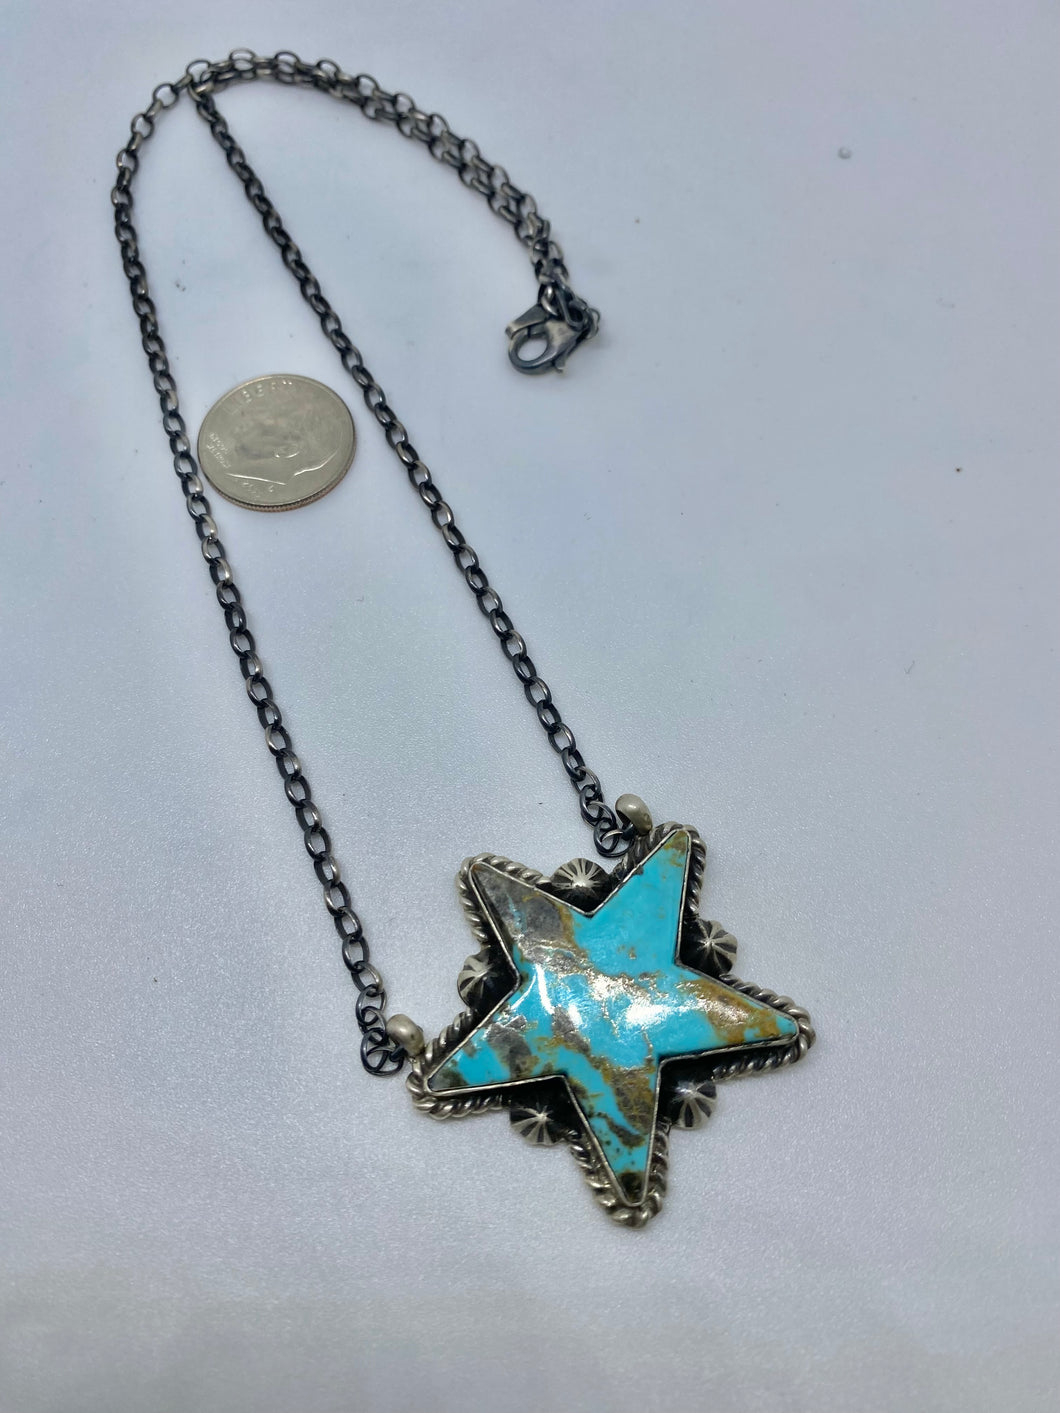 TURQUOISE STAR 16 INCH NECKLACE